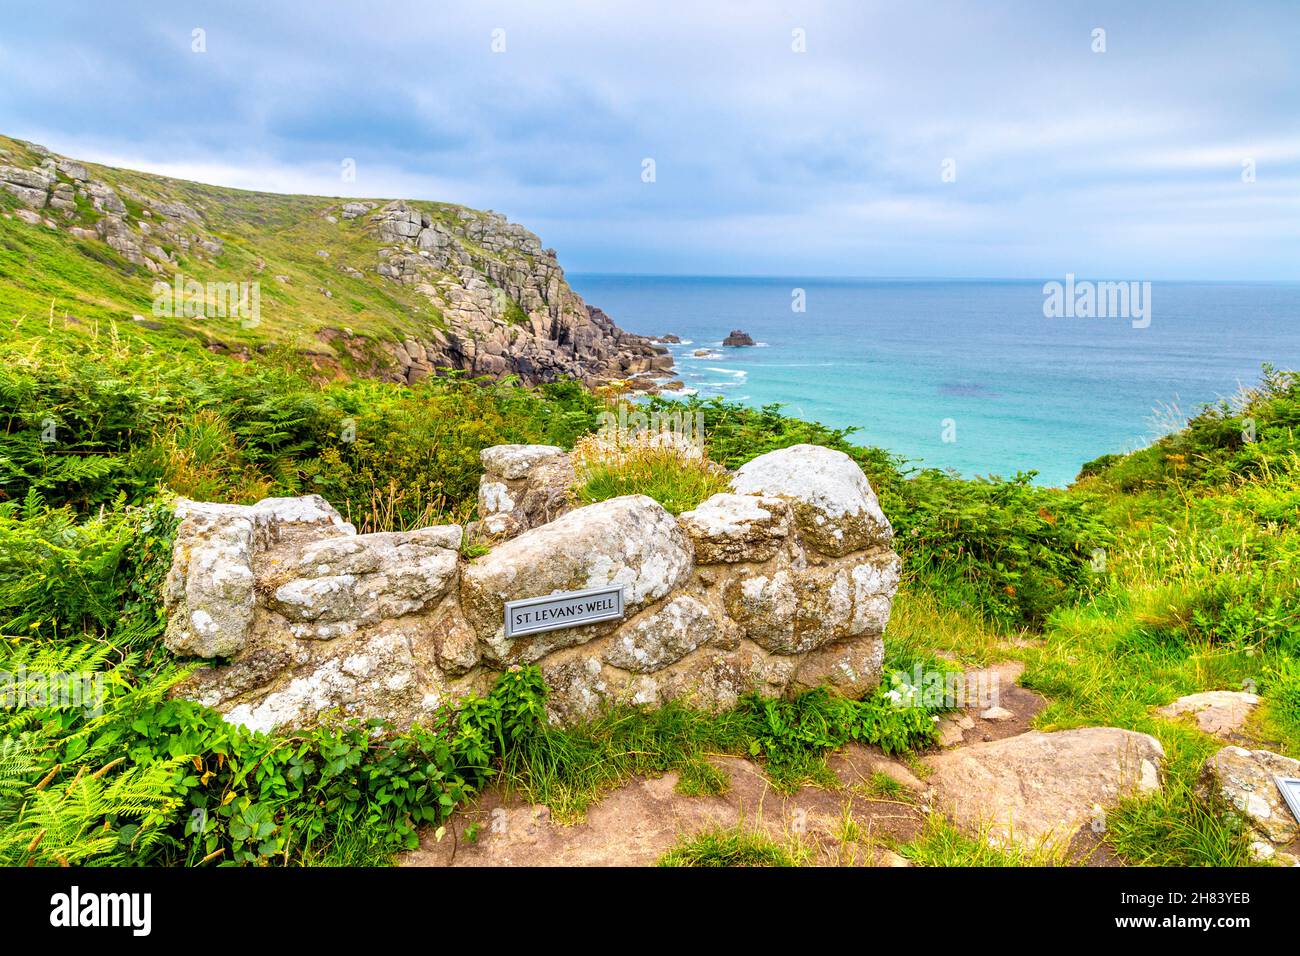 St. Levan's Holy Well near Porthcurno above Porthchapel beach along the South West Coast Path, Cornwall, UK Stock Photo